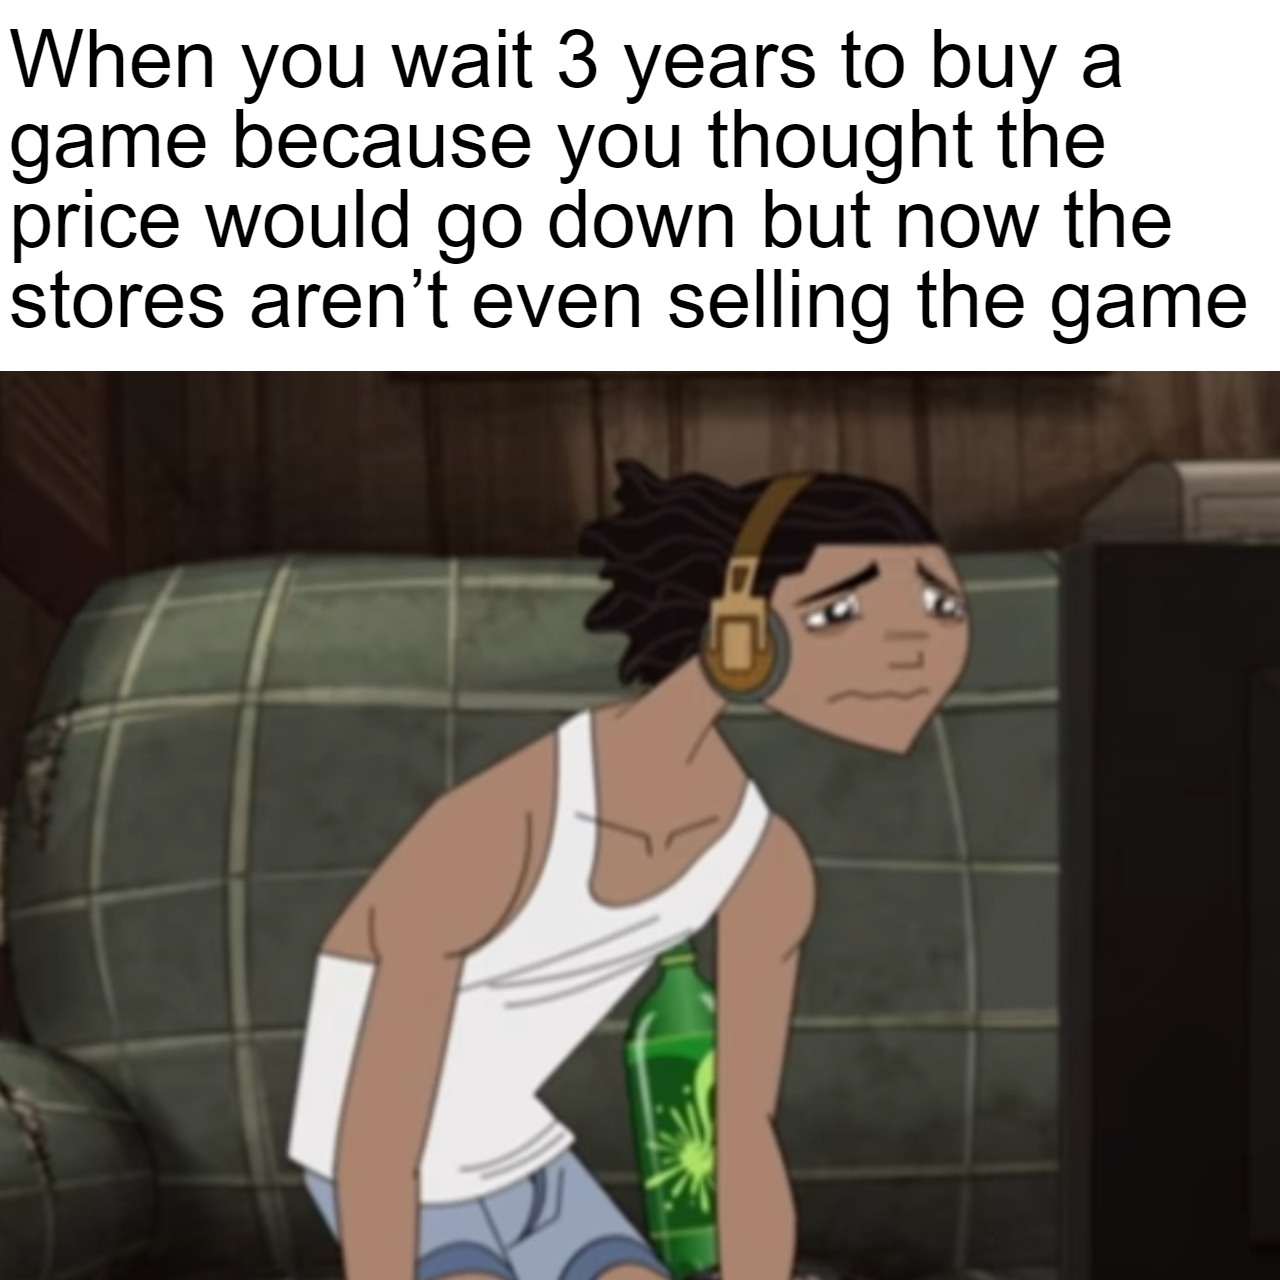 gaming memes  - frederick douglass quotes - When you wait 3 years to buy a game because you thought the price would go down but now the stores aren't even selling the game